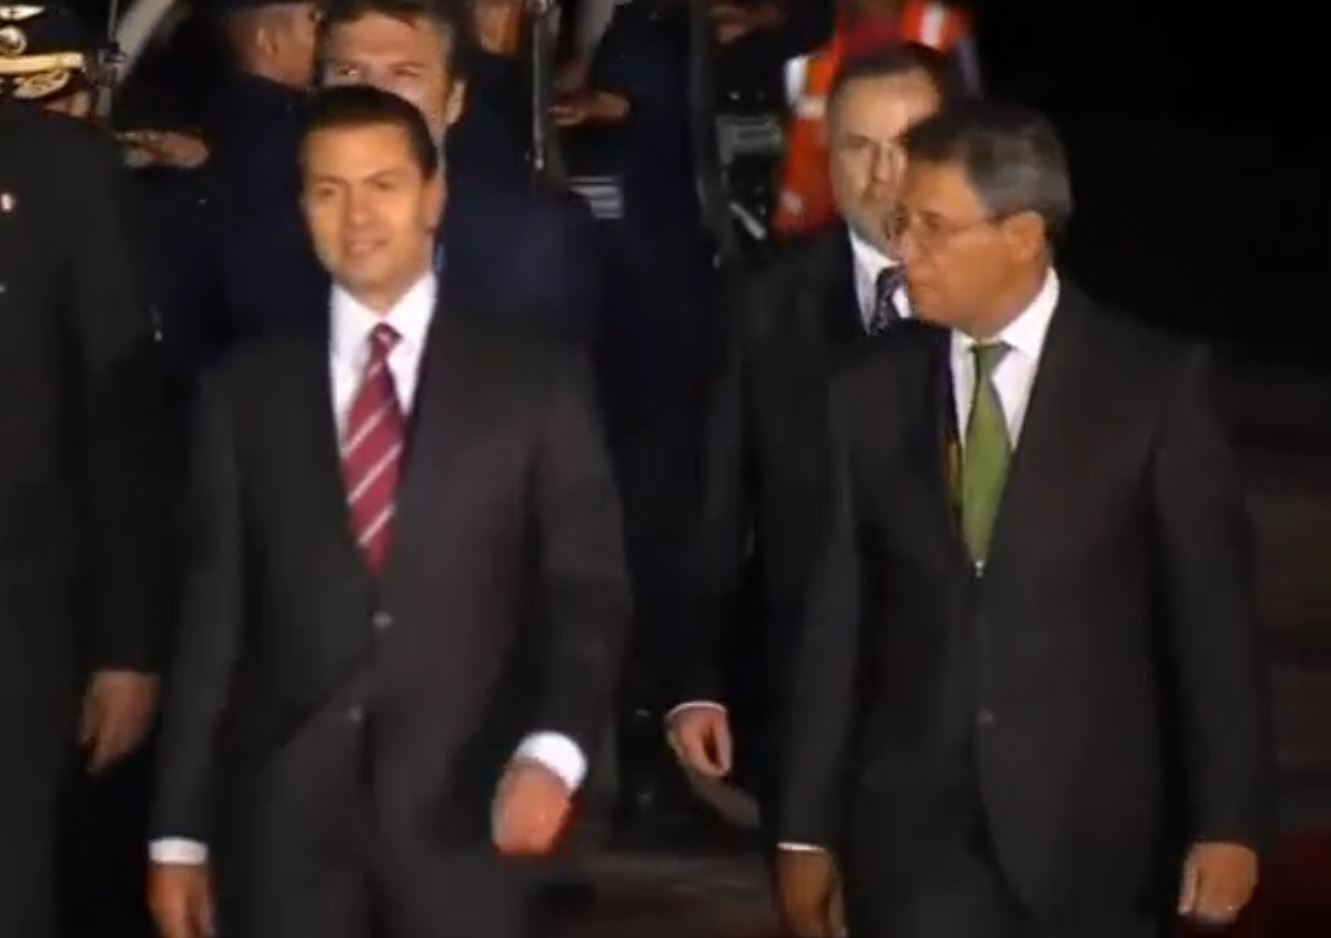 Mexican President Enrique Pena Nieto talks with officials shortly after arriving in Lima, Peru for the APEC Leaders' Summit.  (Photo grabbed from Reuters video)